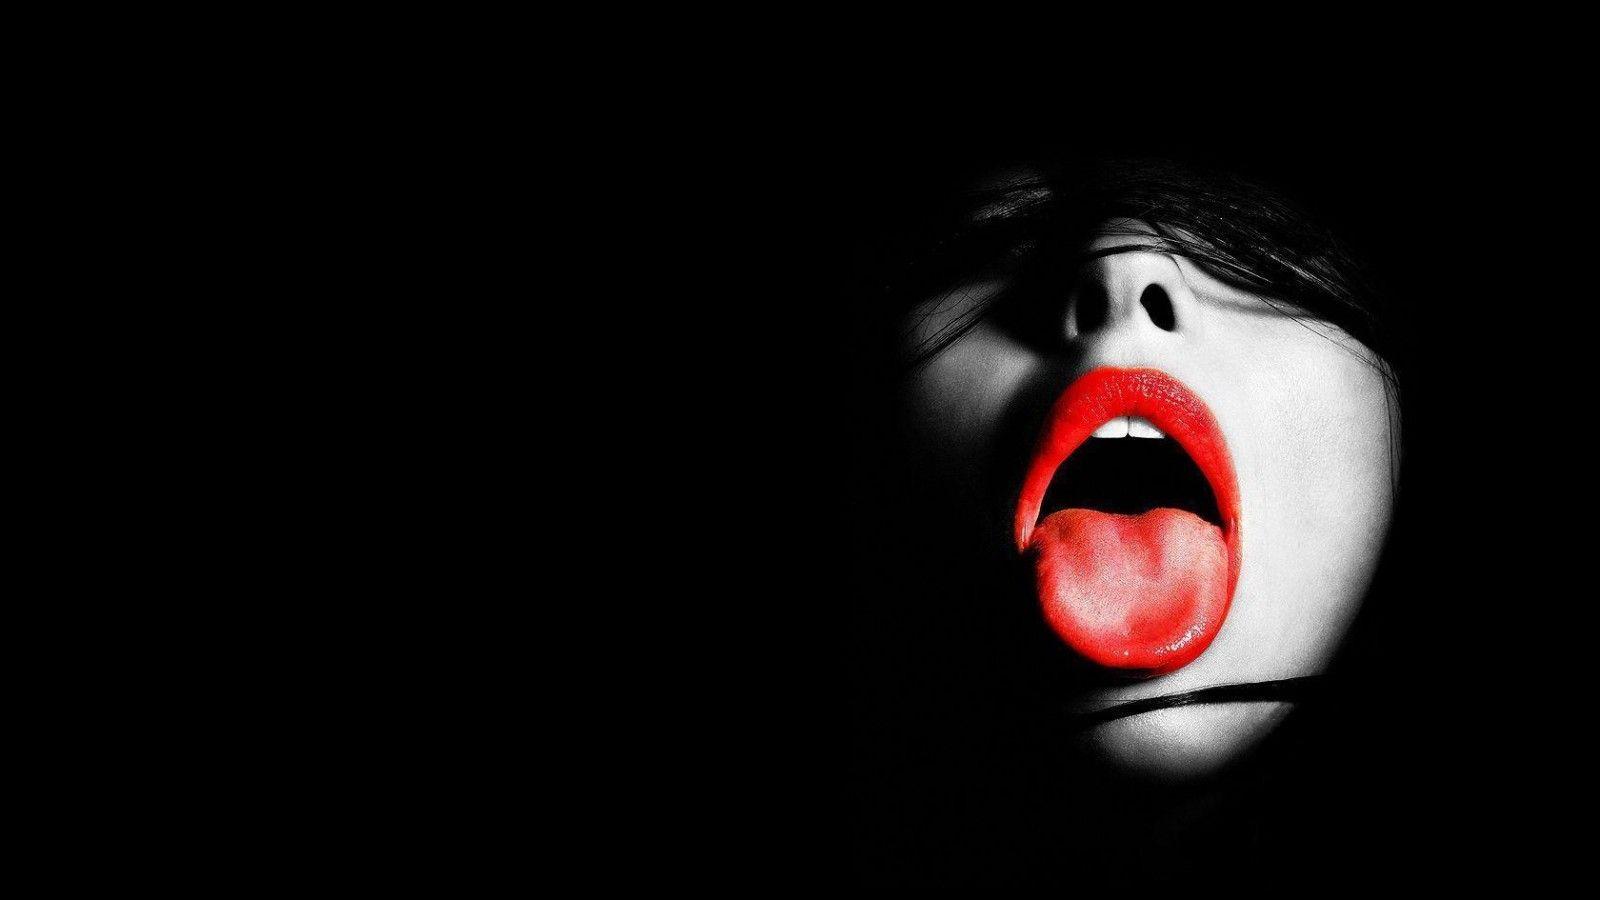 Red Lip and Toungue Logo - Red Lips Tongue Black Background Wallpaper 28454 - Baltana